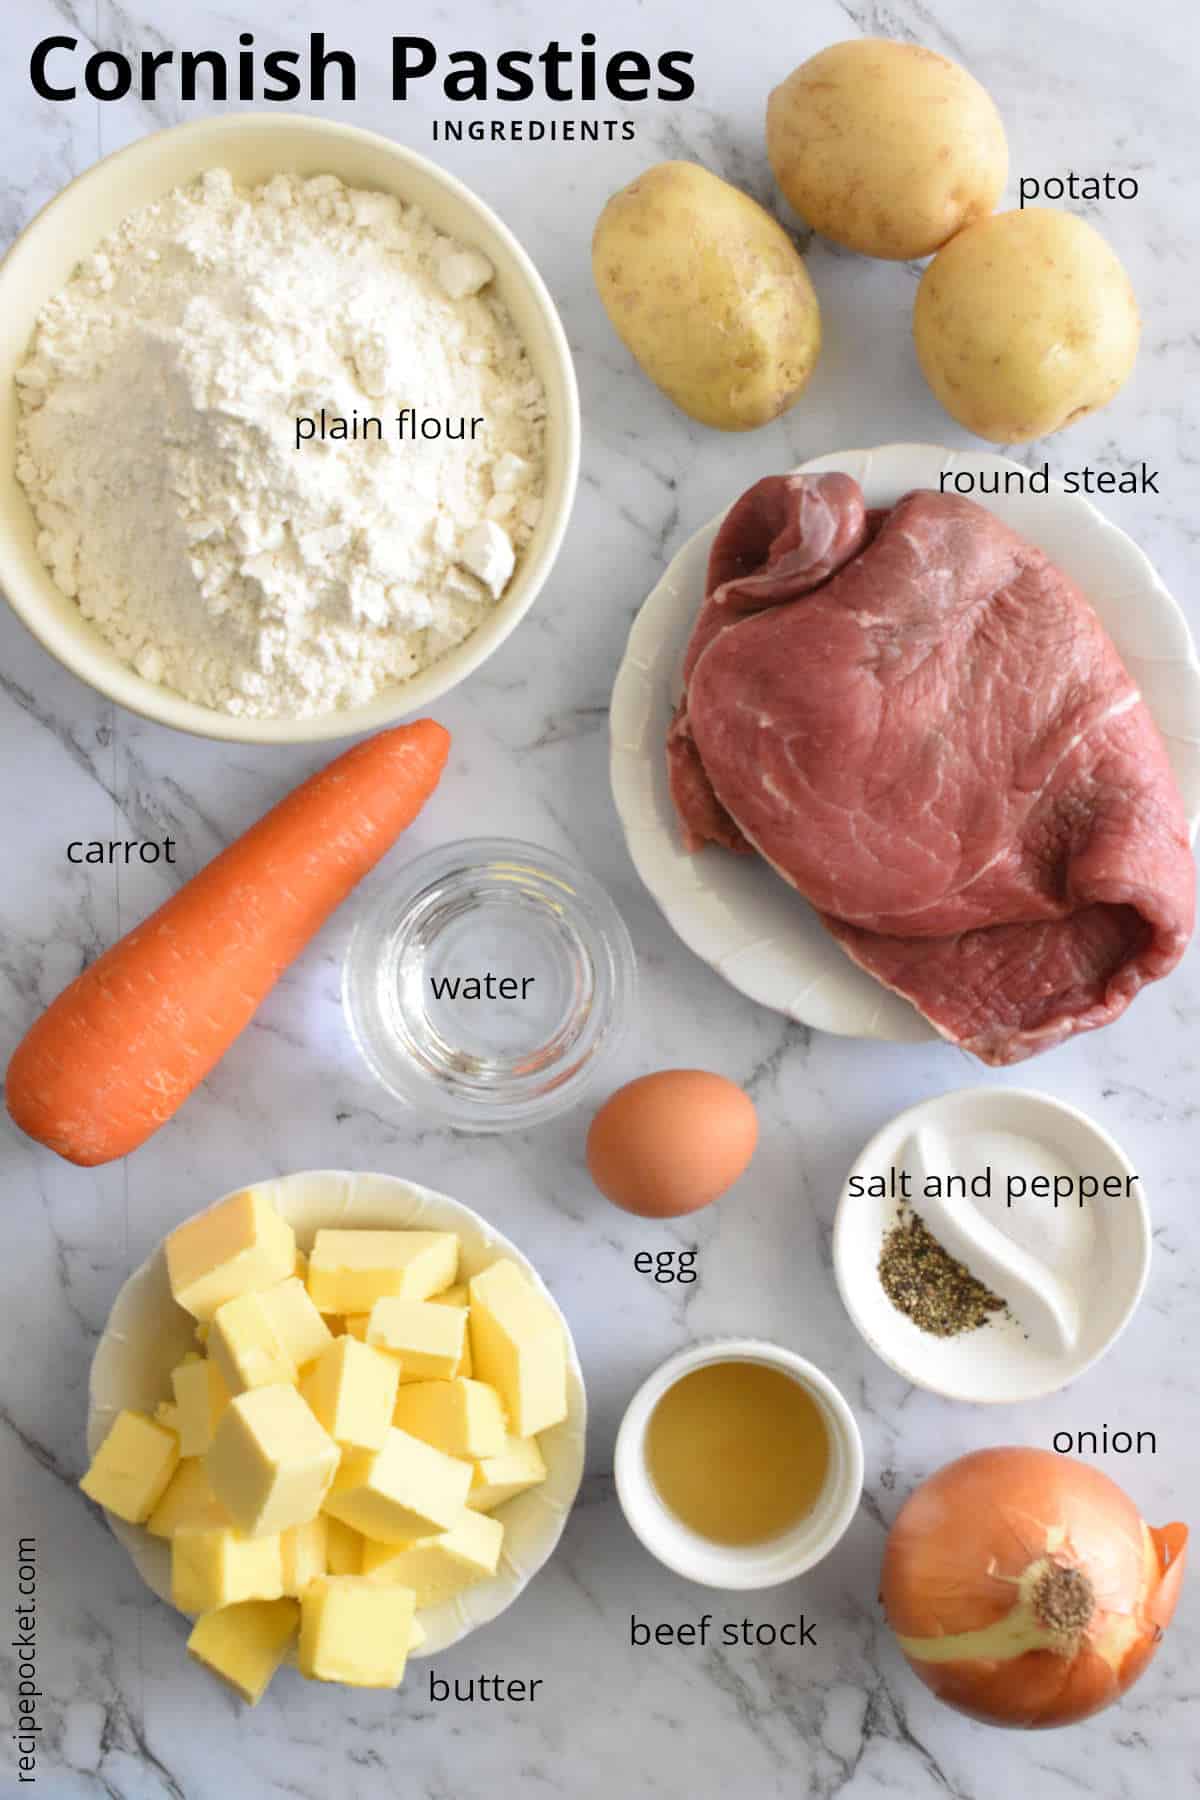 Image of the ingredients used in this Cornish pasties recipe.